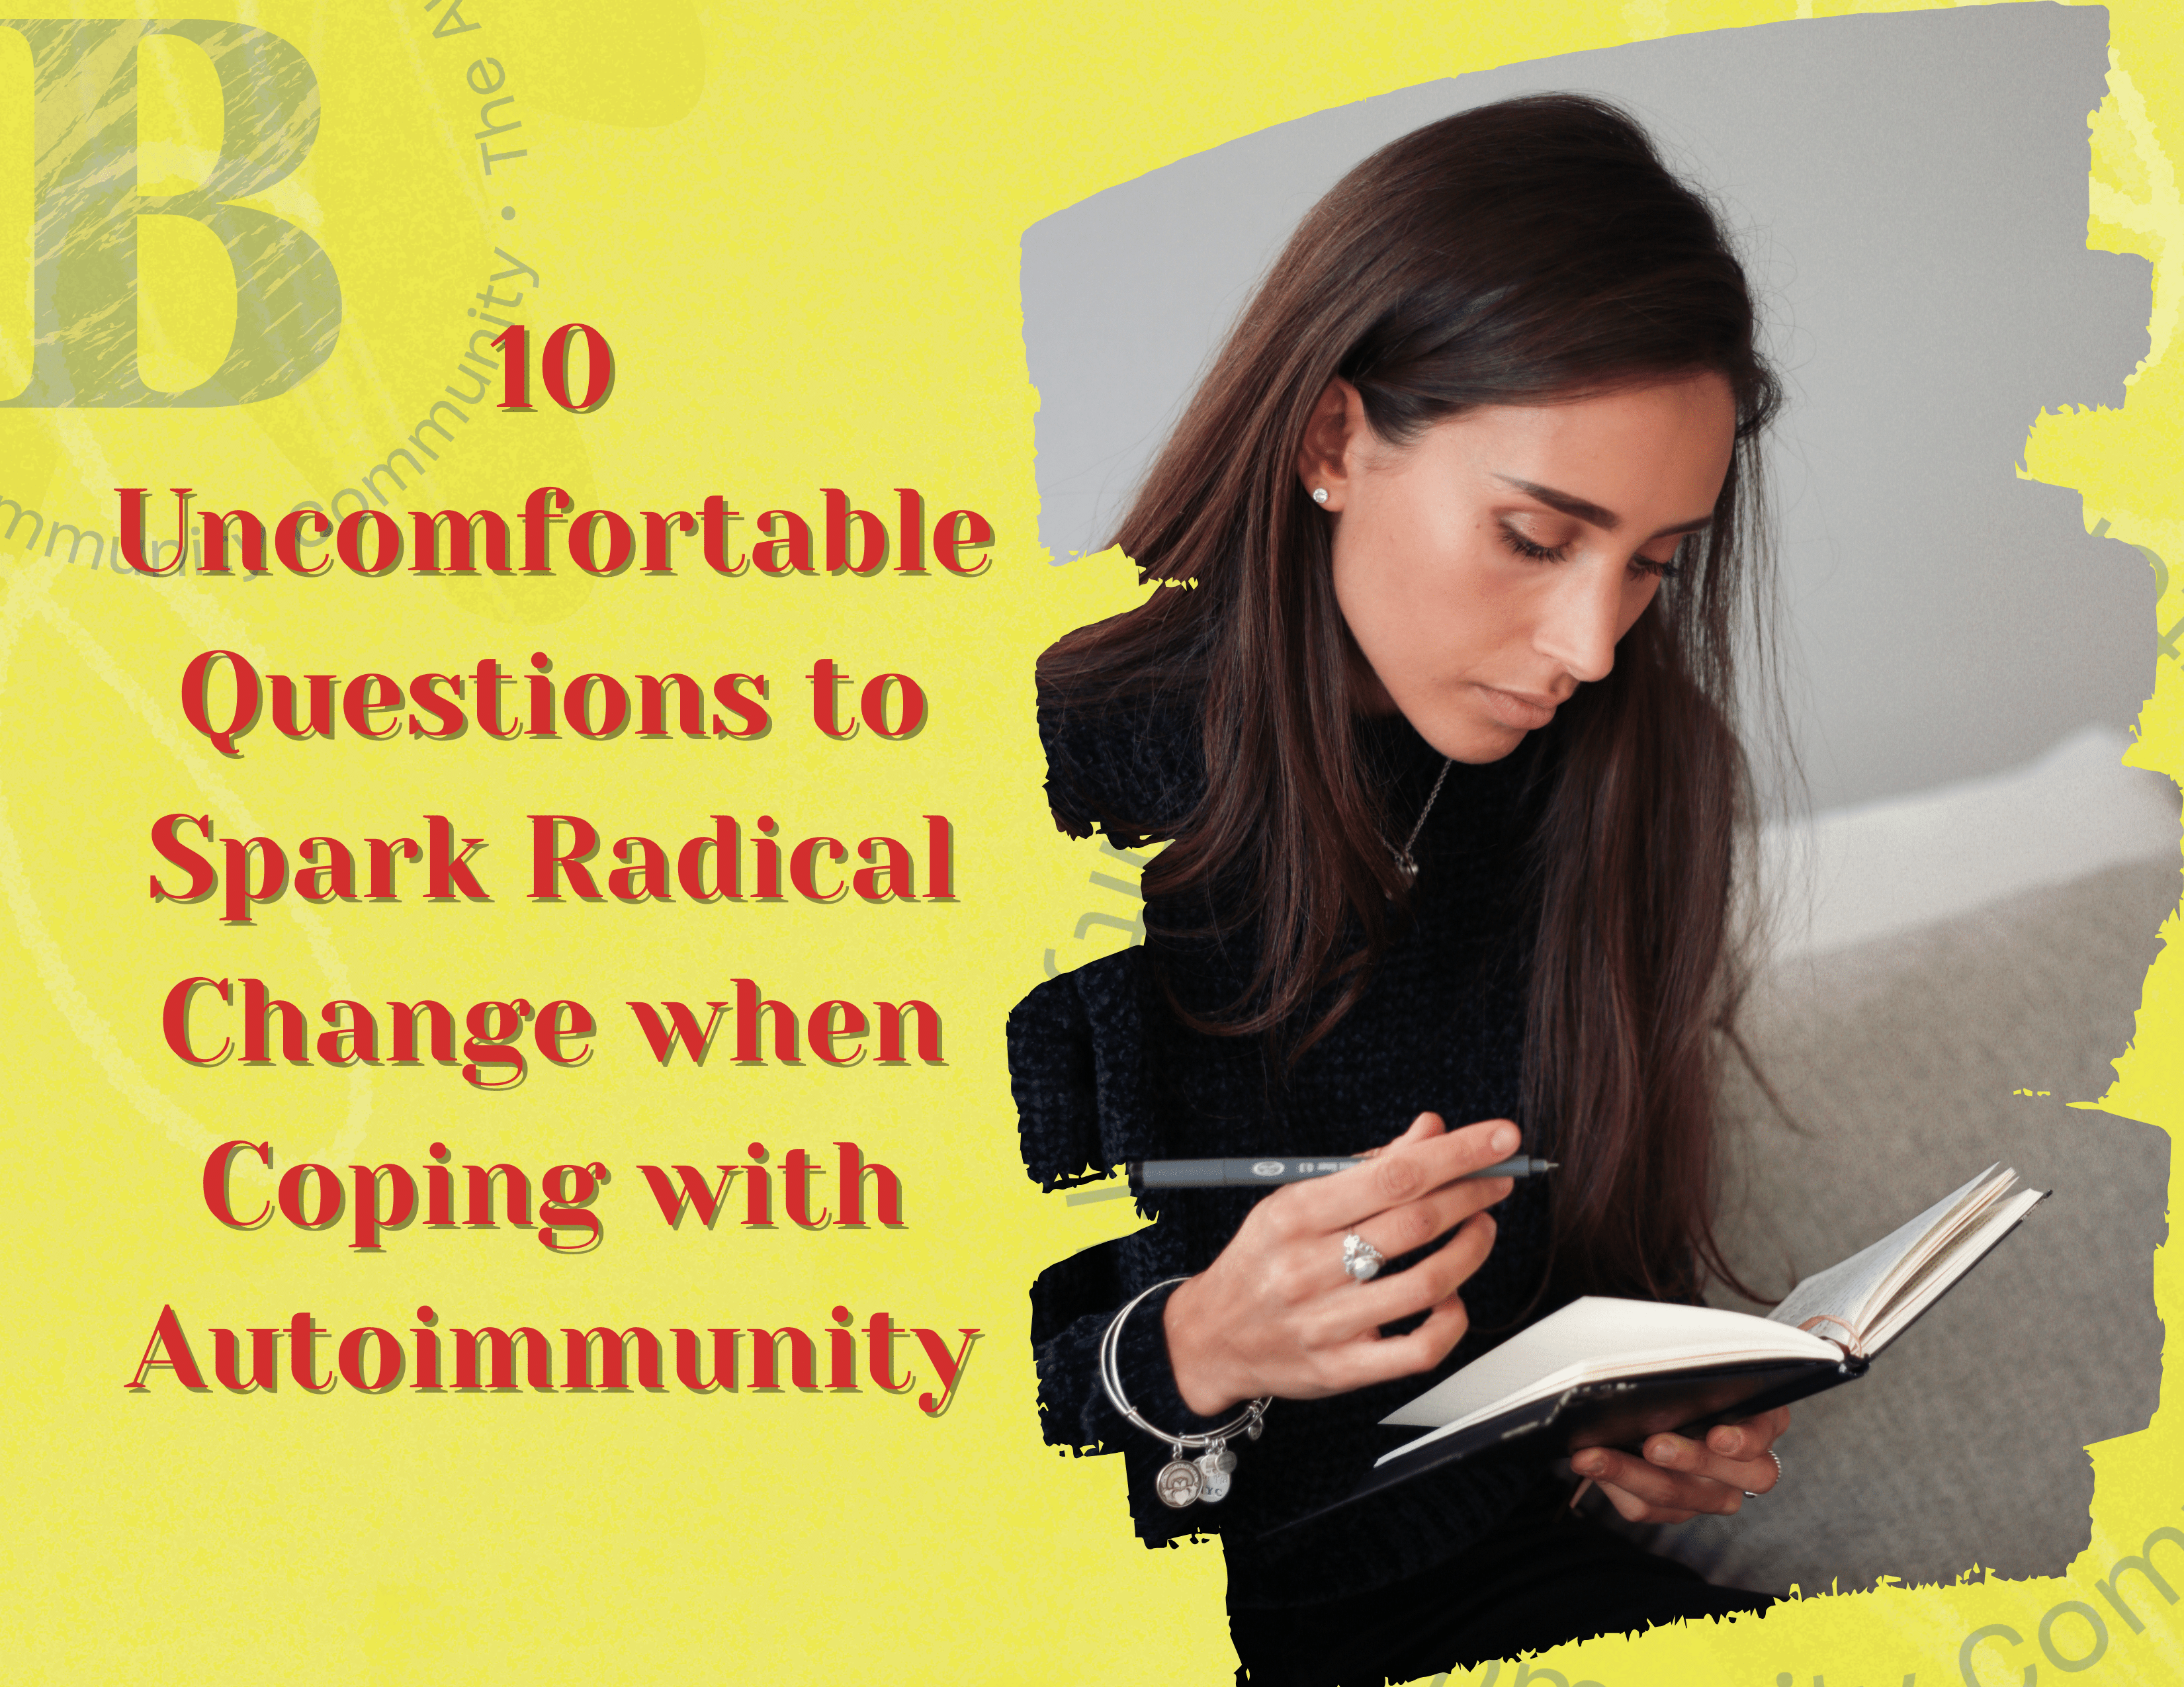 10 Uncomfortable Questions to Spark Radical Change when Coping with Autoimmunity